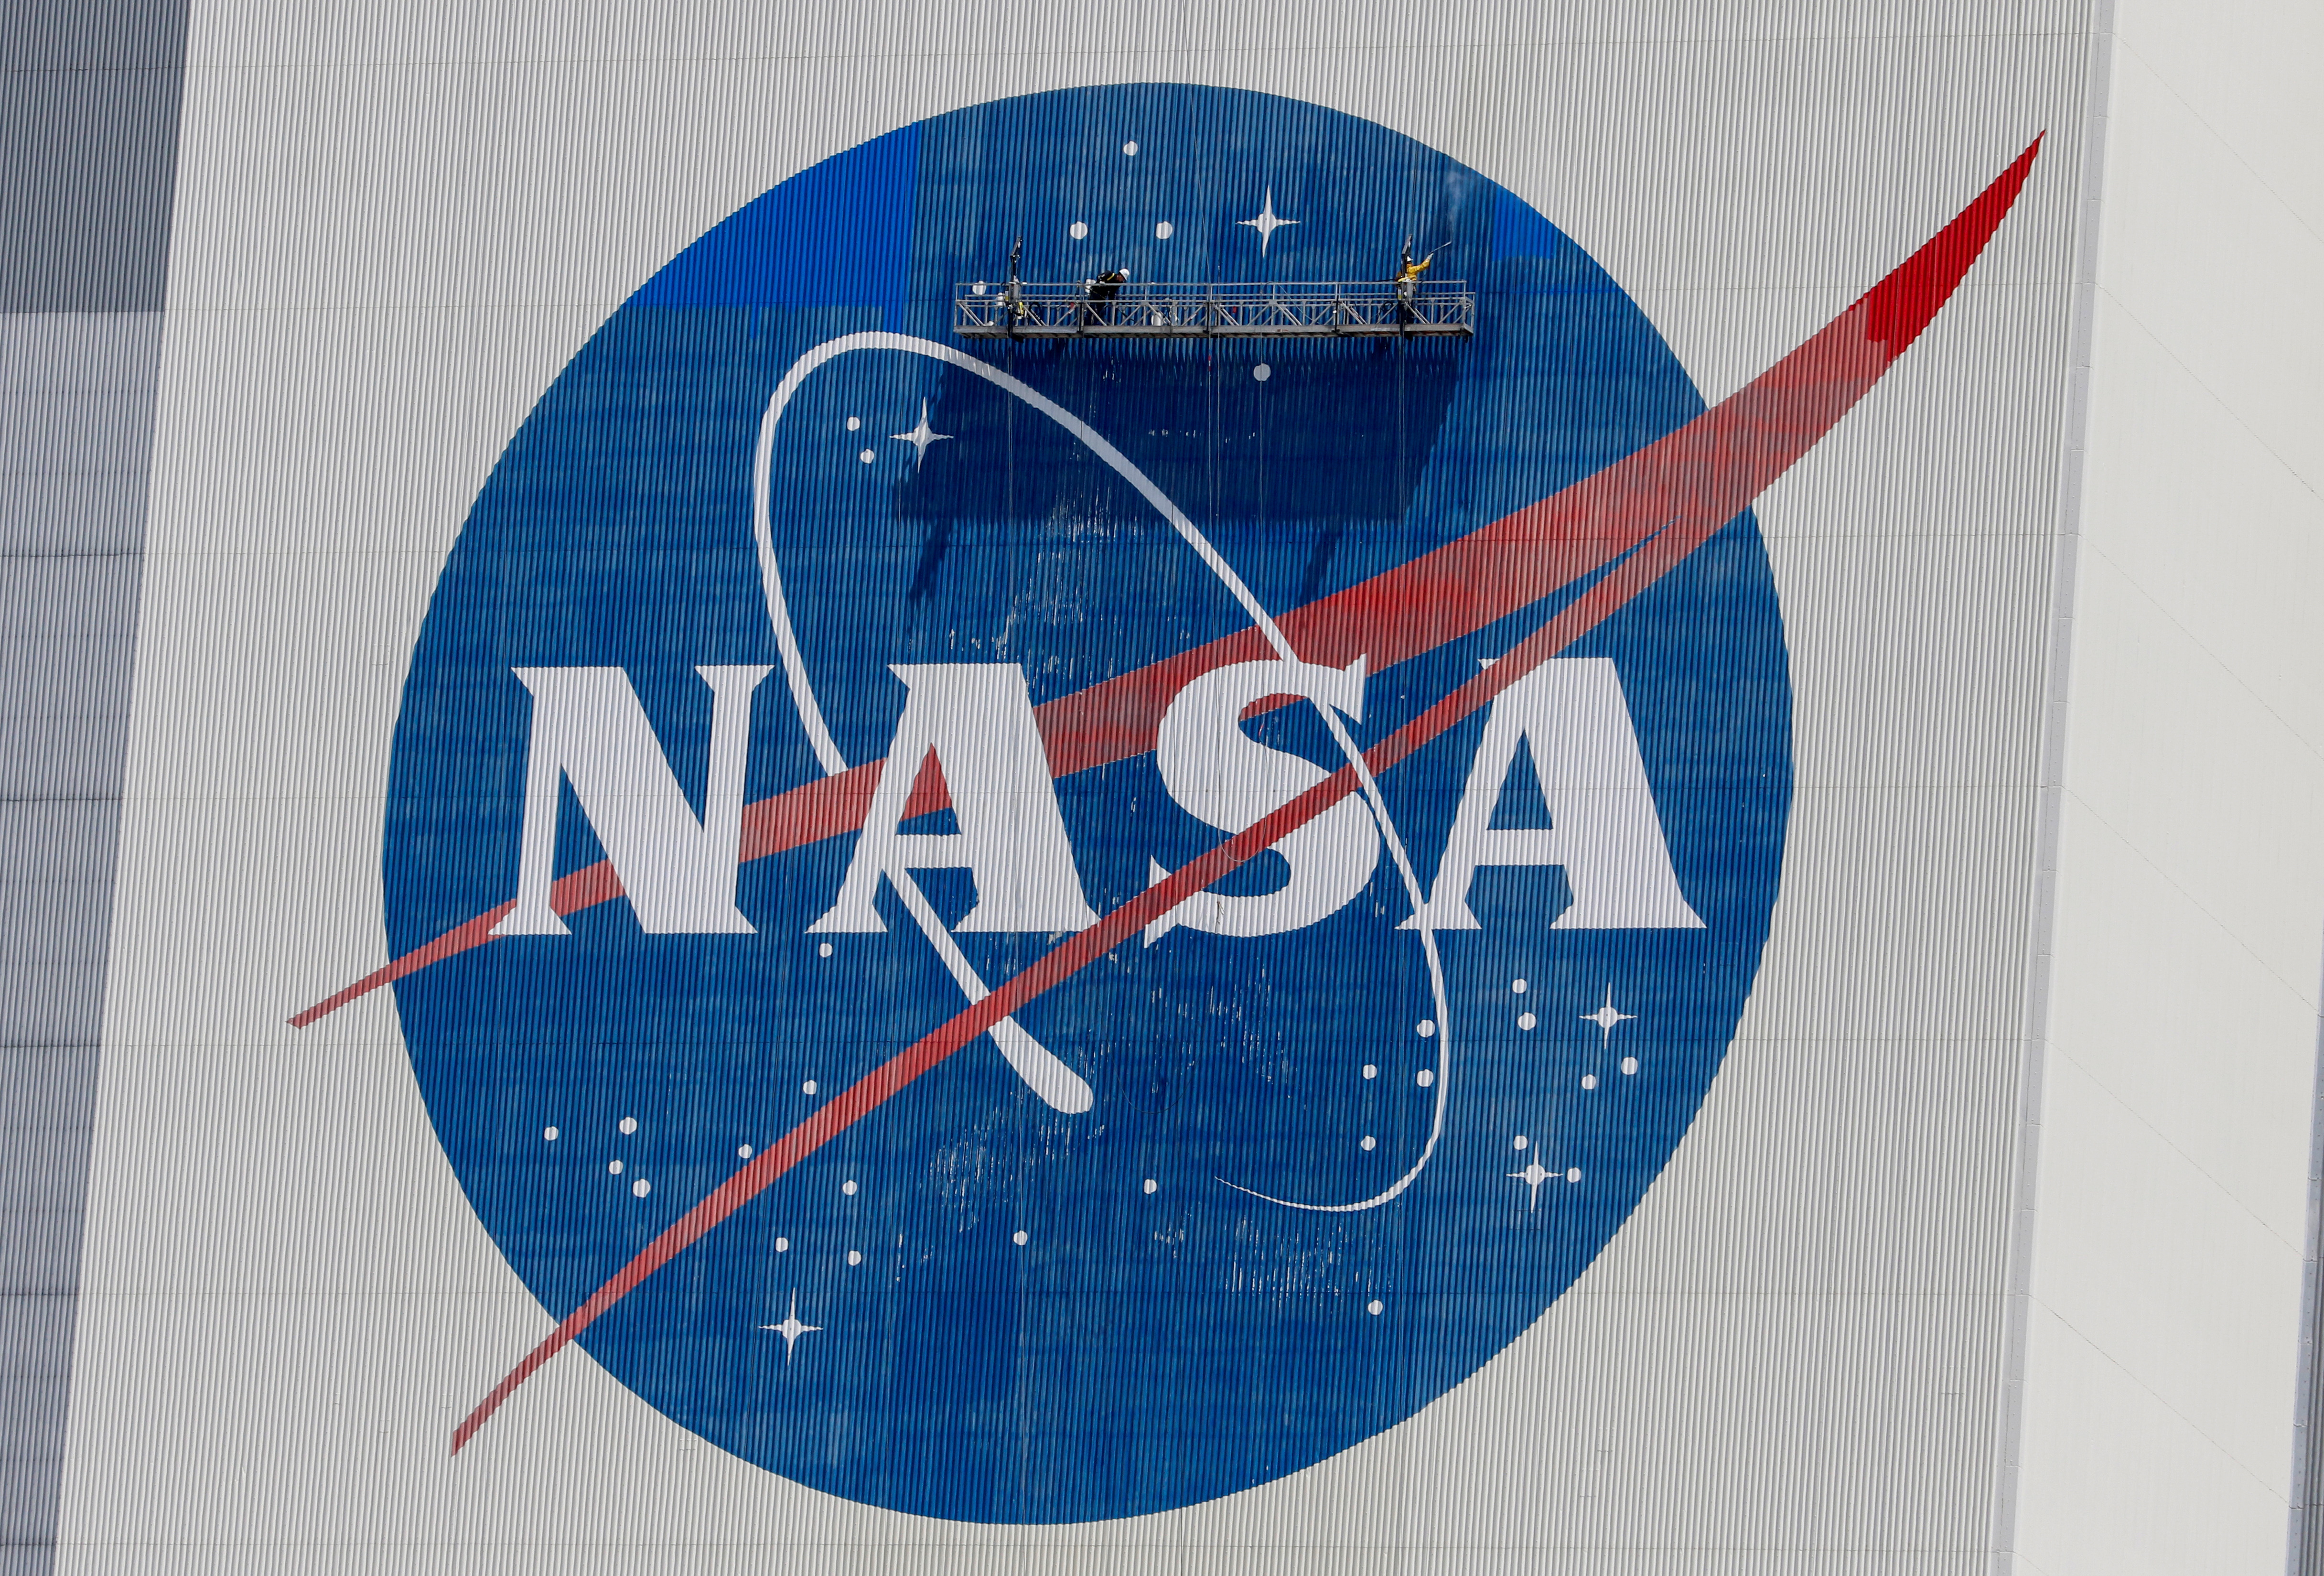 &copy; Reuters. FILE PHOTO: Workers pressure wash the logo of NASA on the Vehicle Assembly Building before SpaceX will send two NASA astronauts to the International Space Station aboard its Falcon 9 rocket, at the Kennedy Space Center in Cape Canaveral, Florida, U.S., Ma